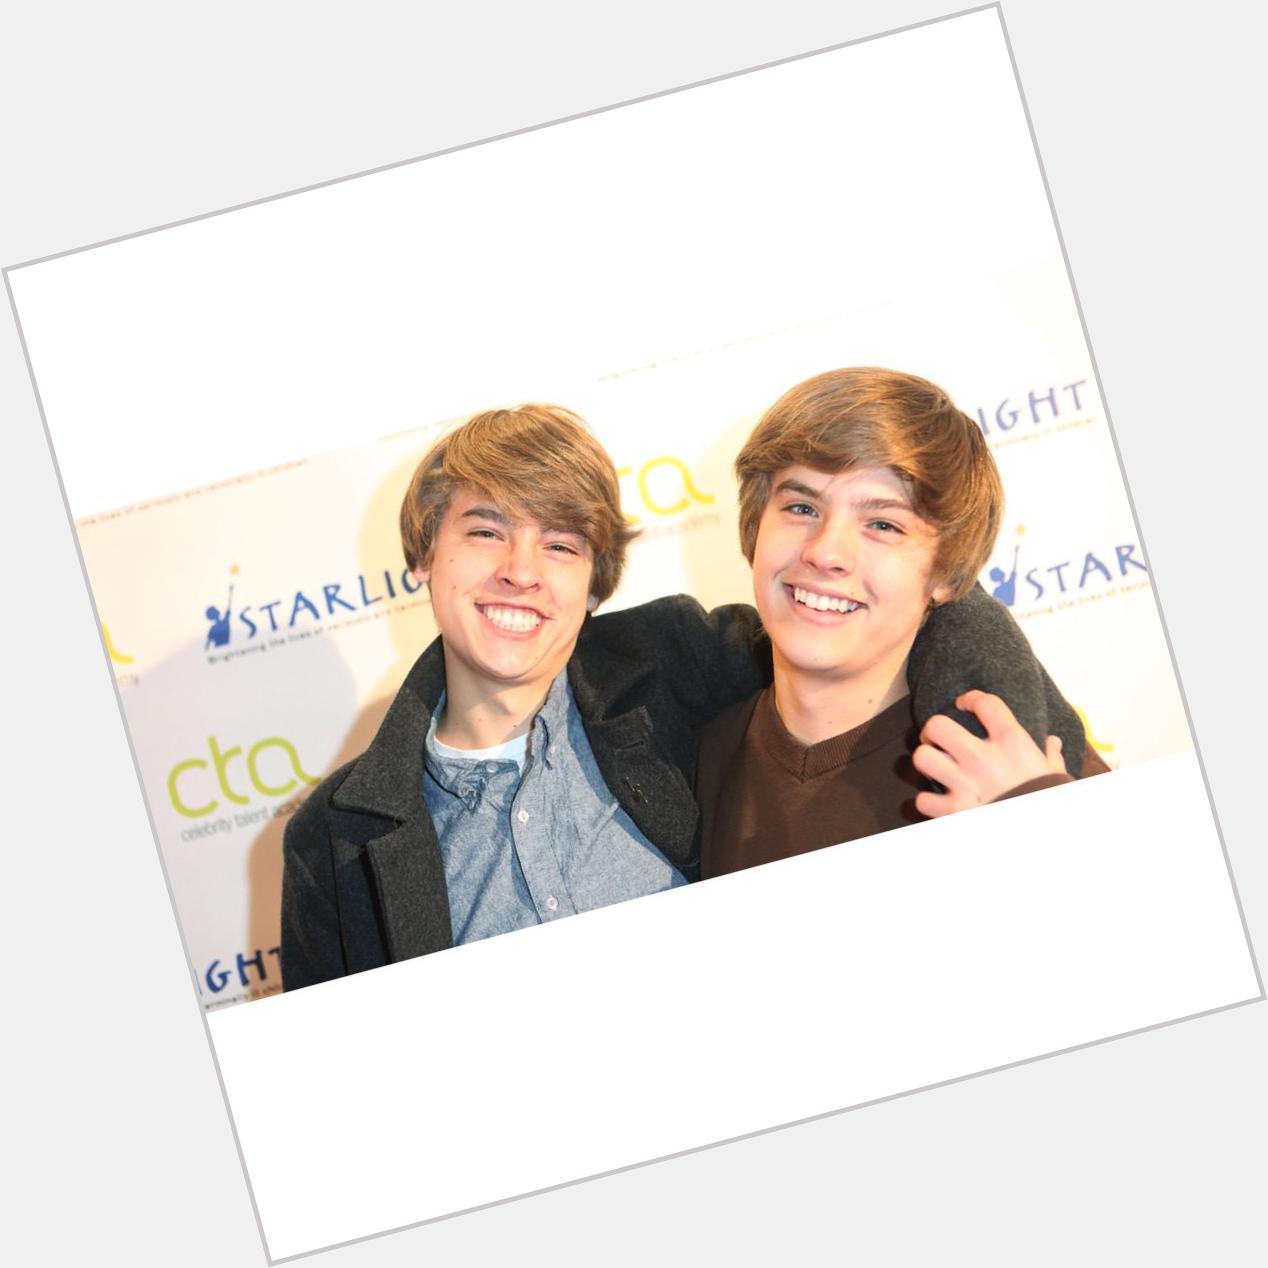 Happy birthday to Dylan and Cole Sprouse! You two made my childhood awesome! Thank you! 